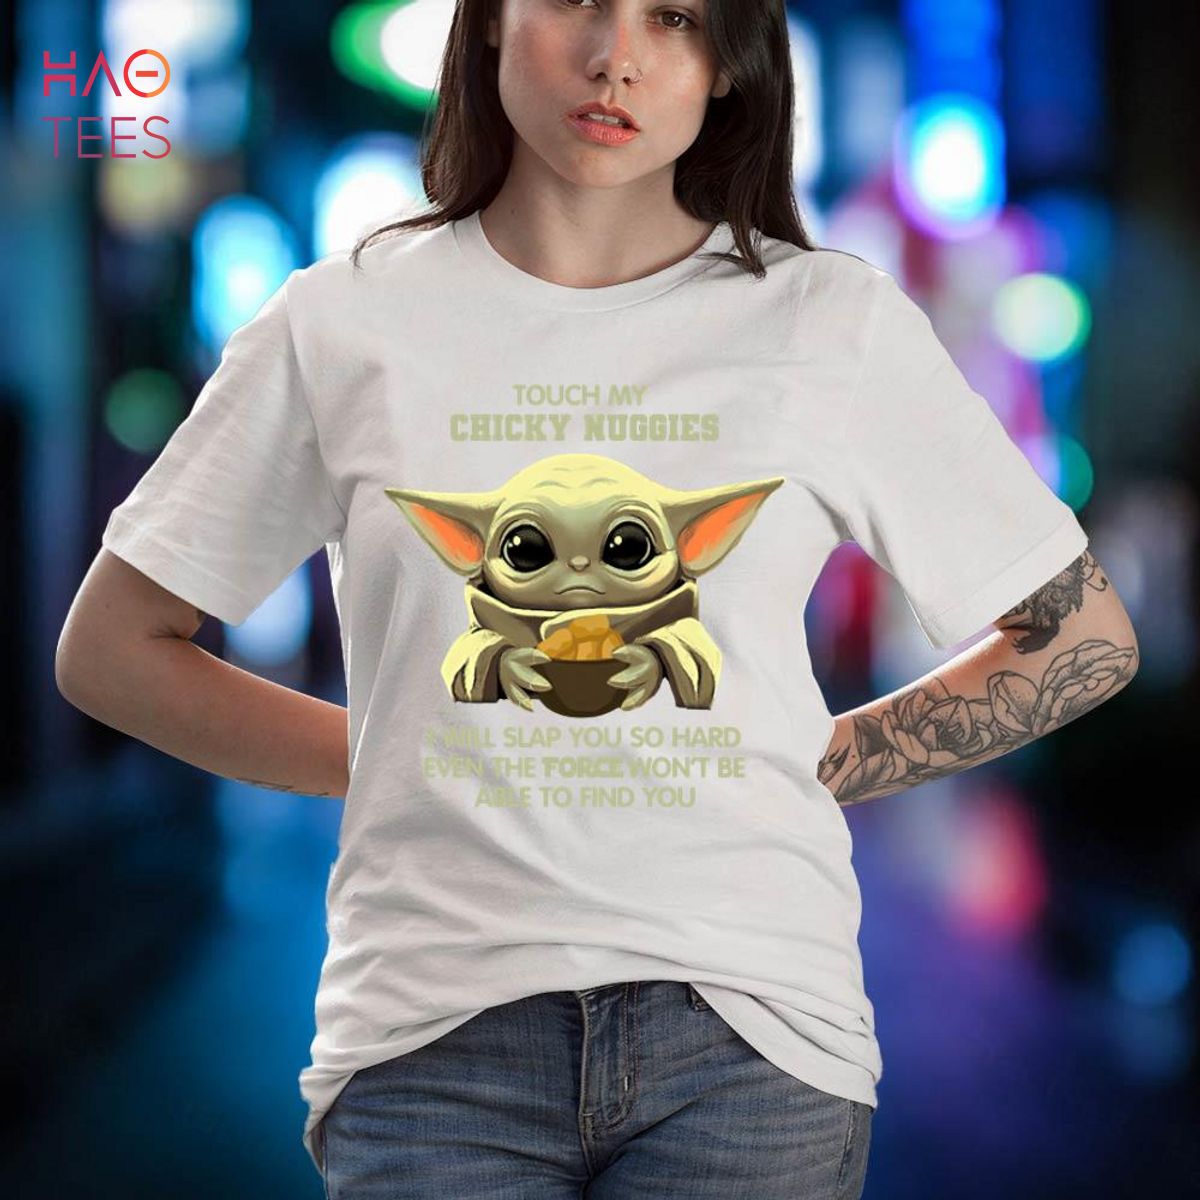 Baby Yoda Touch my chicky nuggies I will slap you so hard even the force won't be able to find you shirt